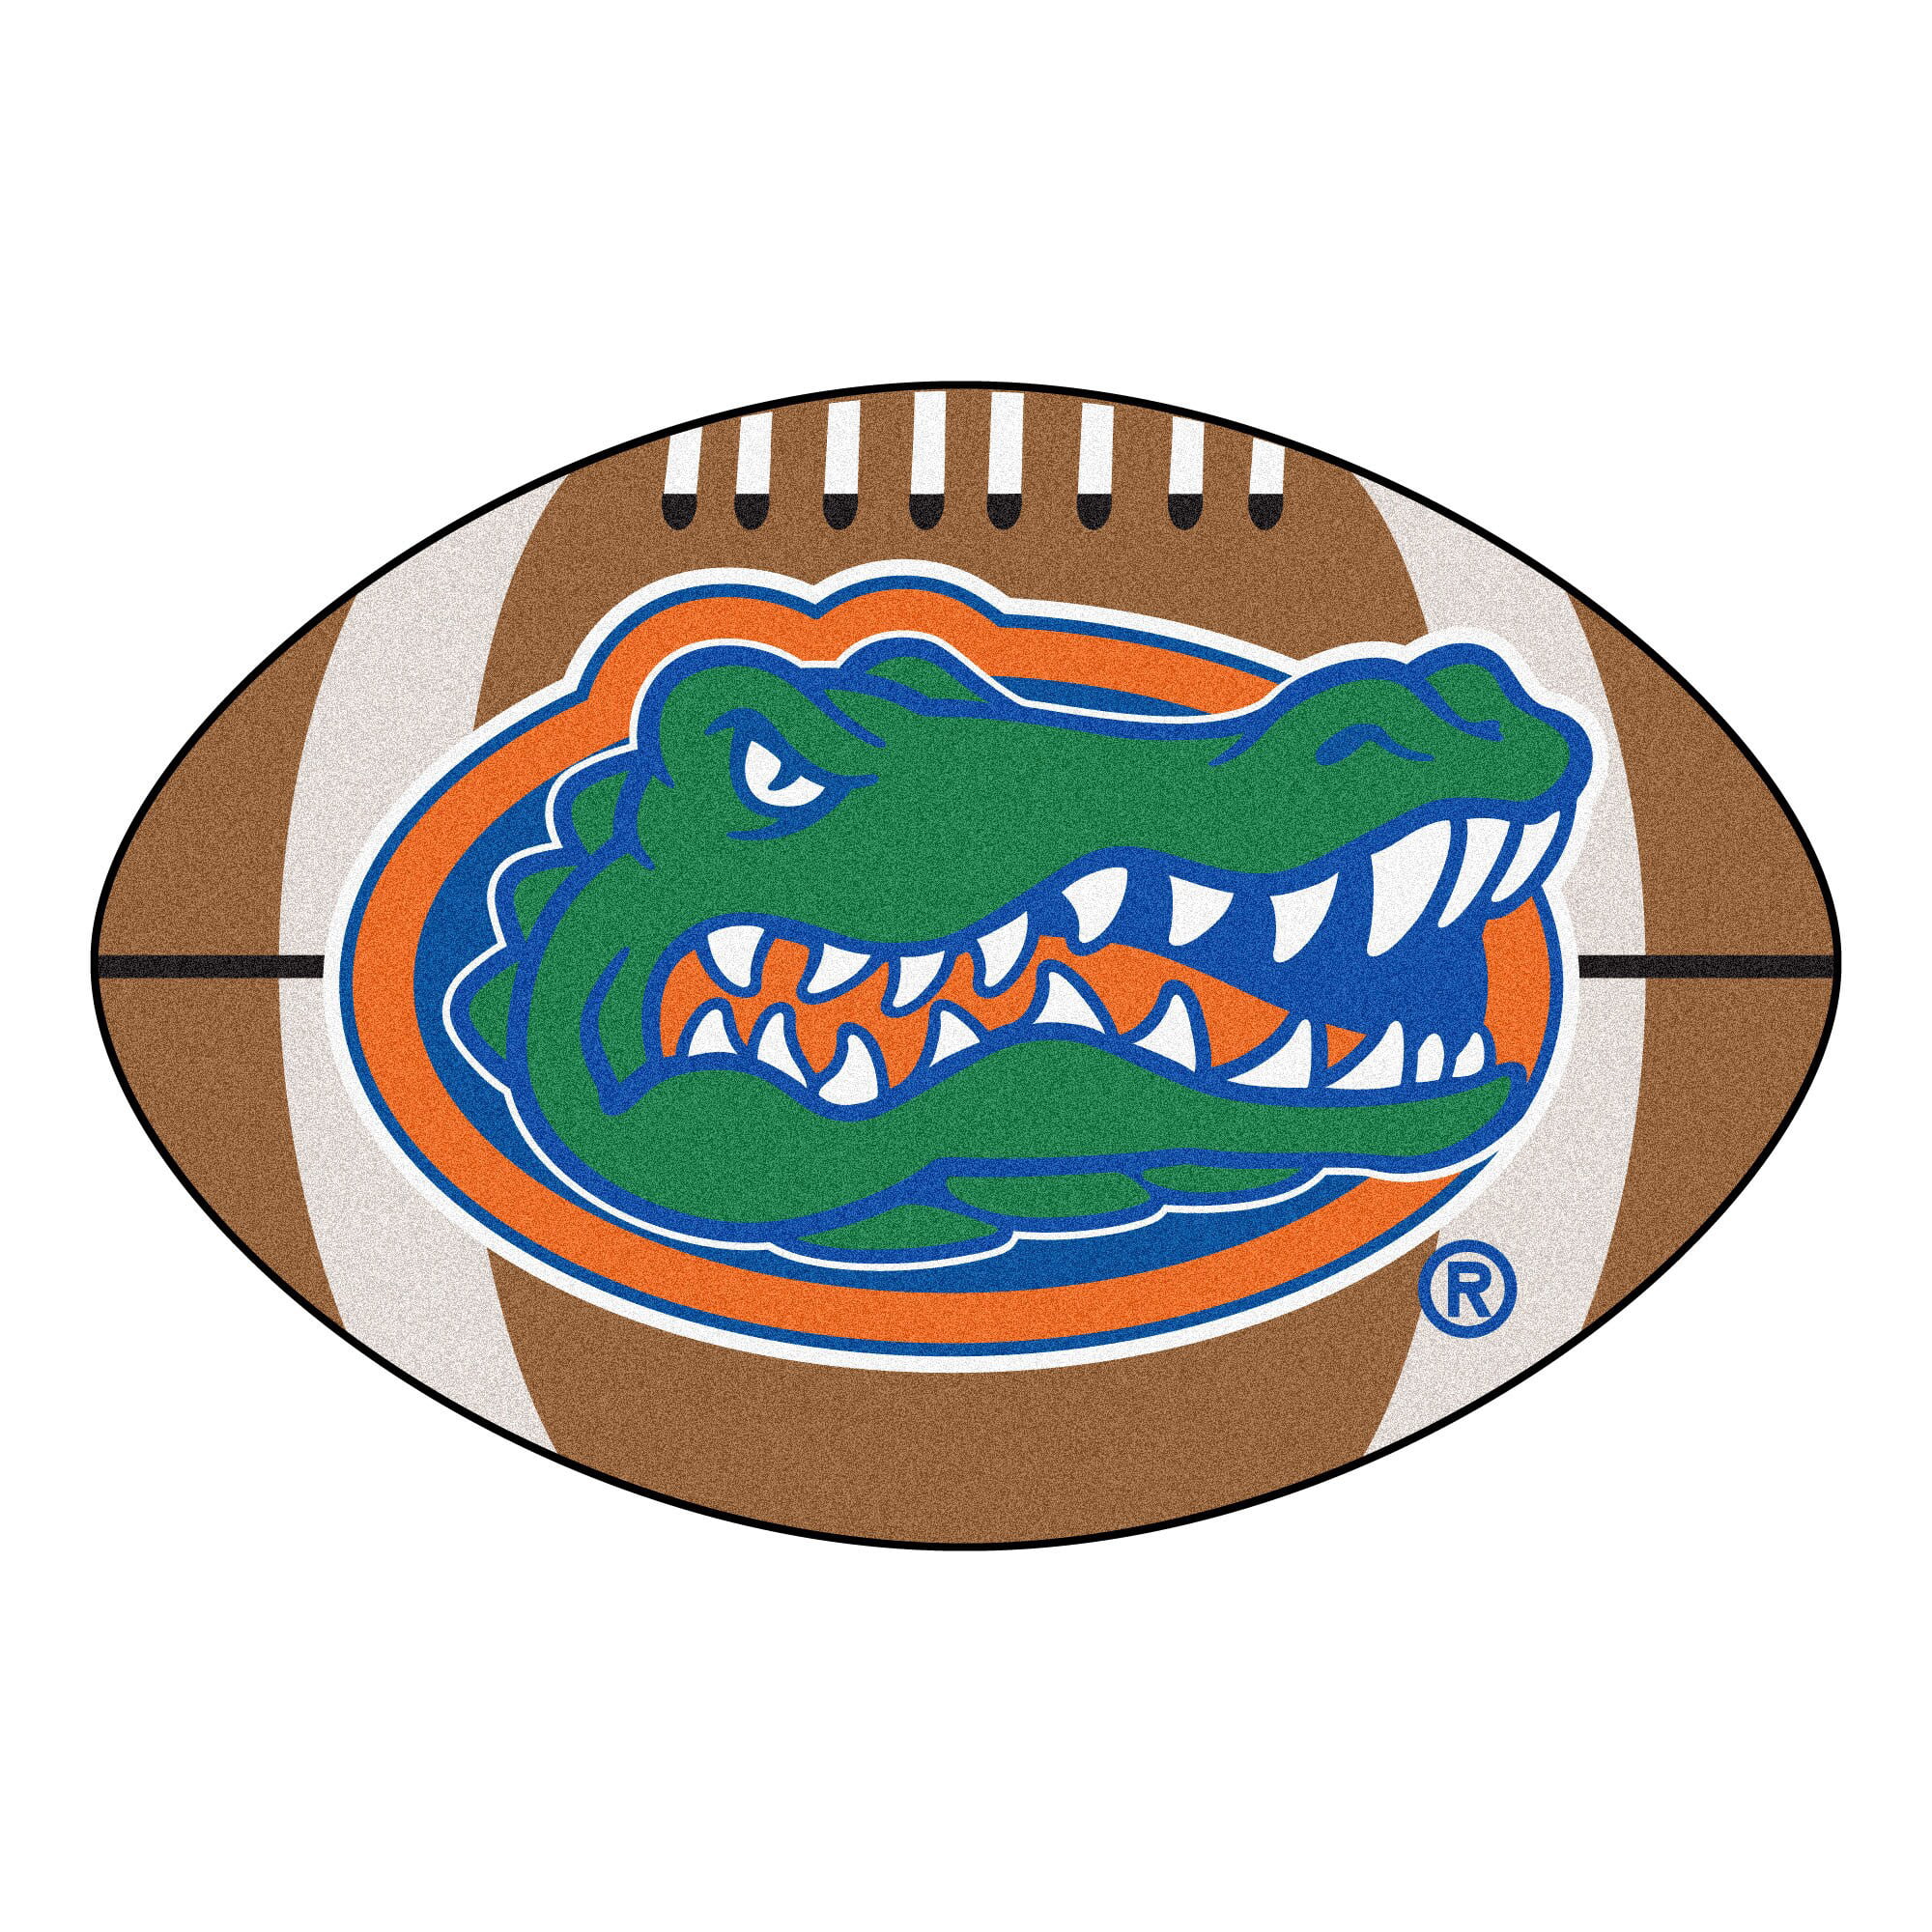 5 Inch Albert Gator Logo Decal UF University of Florida Gators FL Removable Wall Sticker Art NCAA Home Room Decor 5 12 by 3 12 Inches